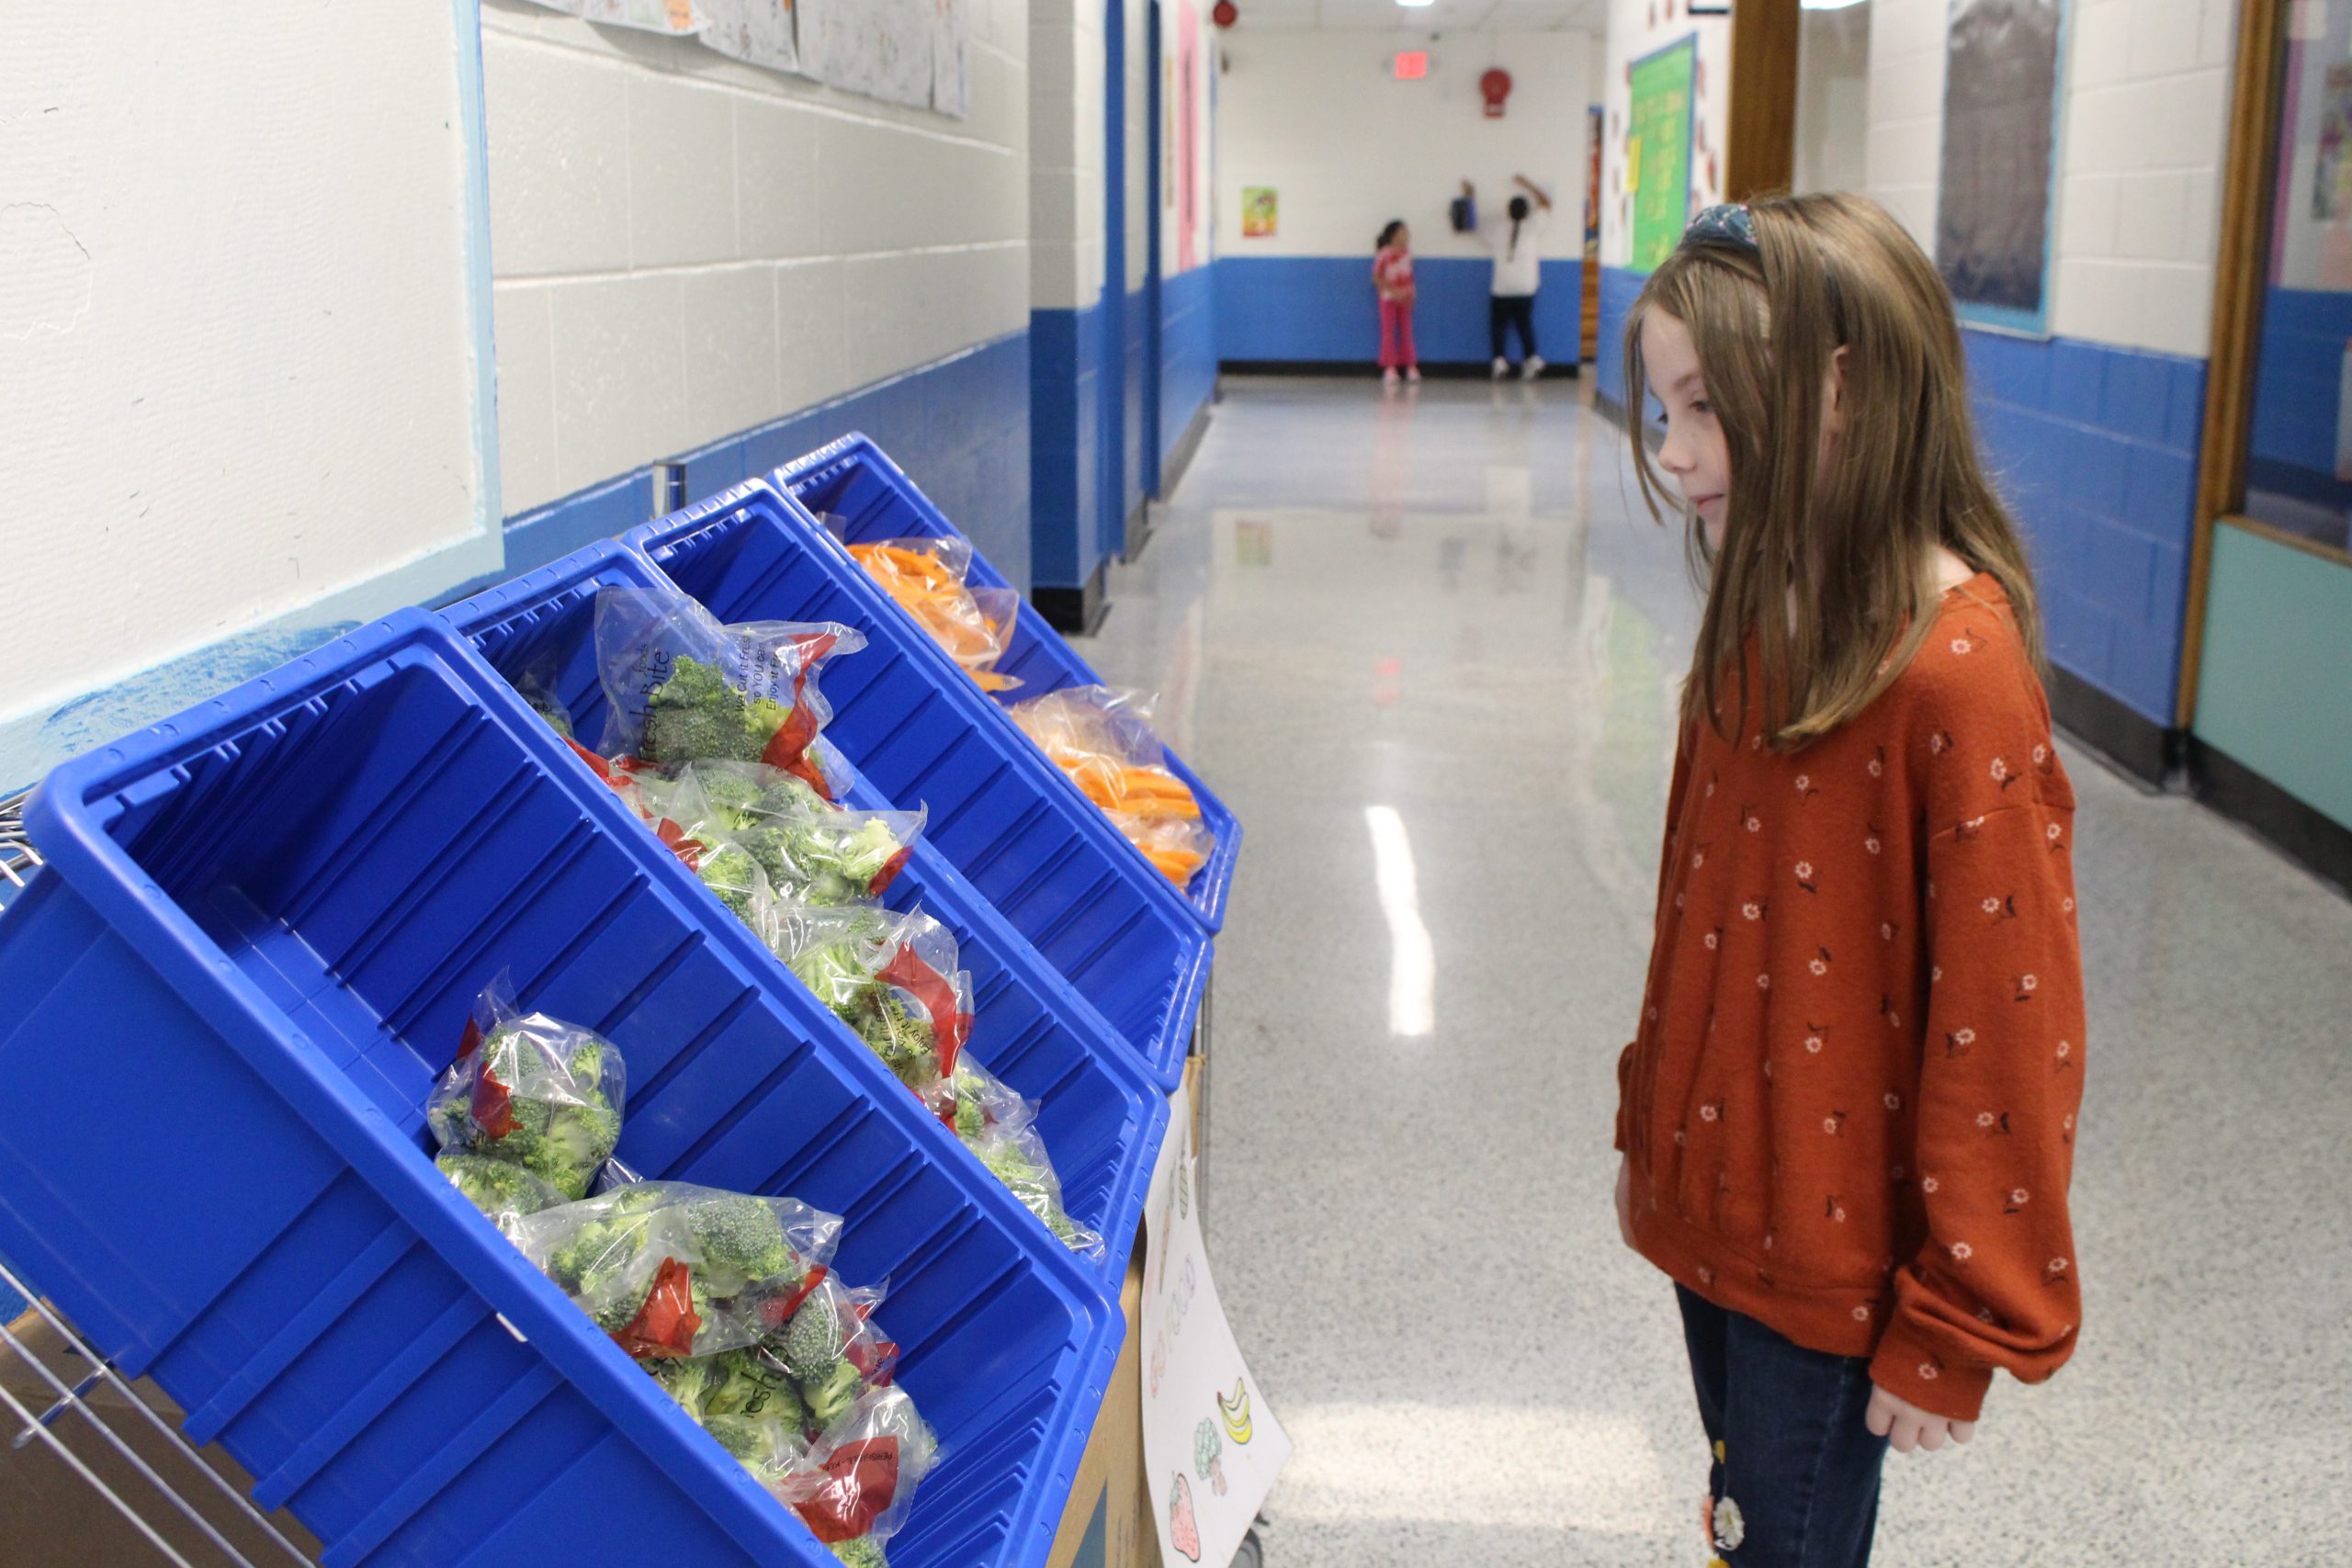 a young girl is looking at fresh fruit and vegetables on a cart